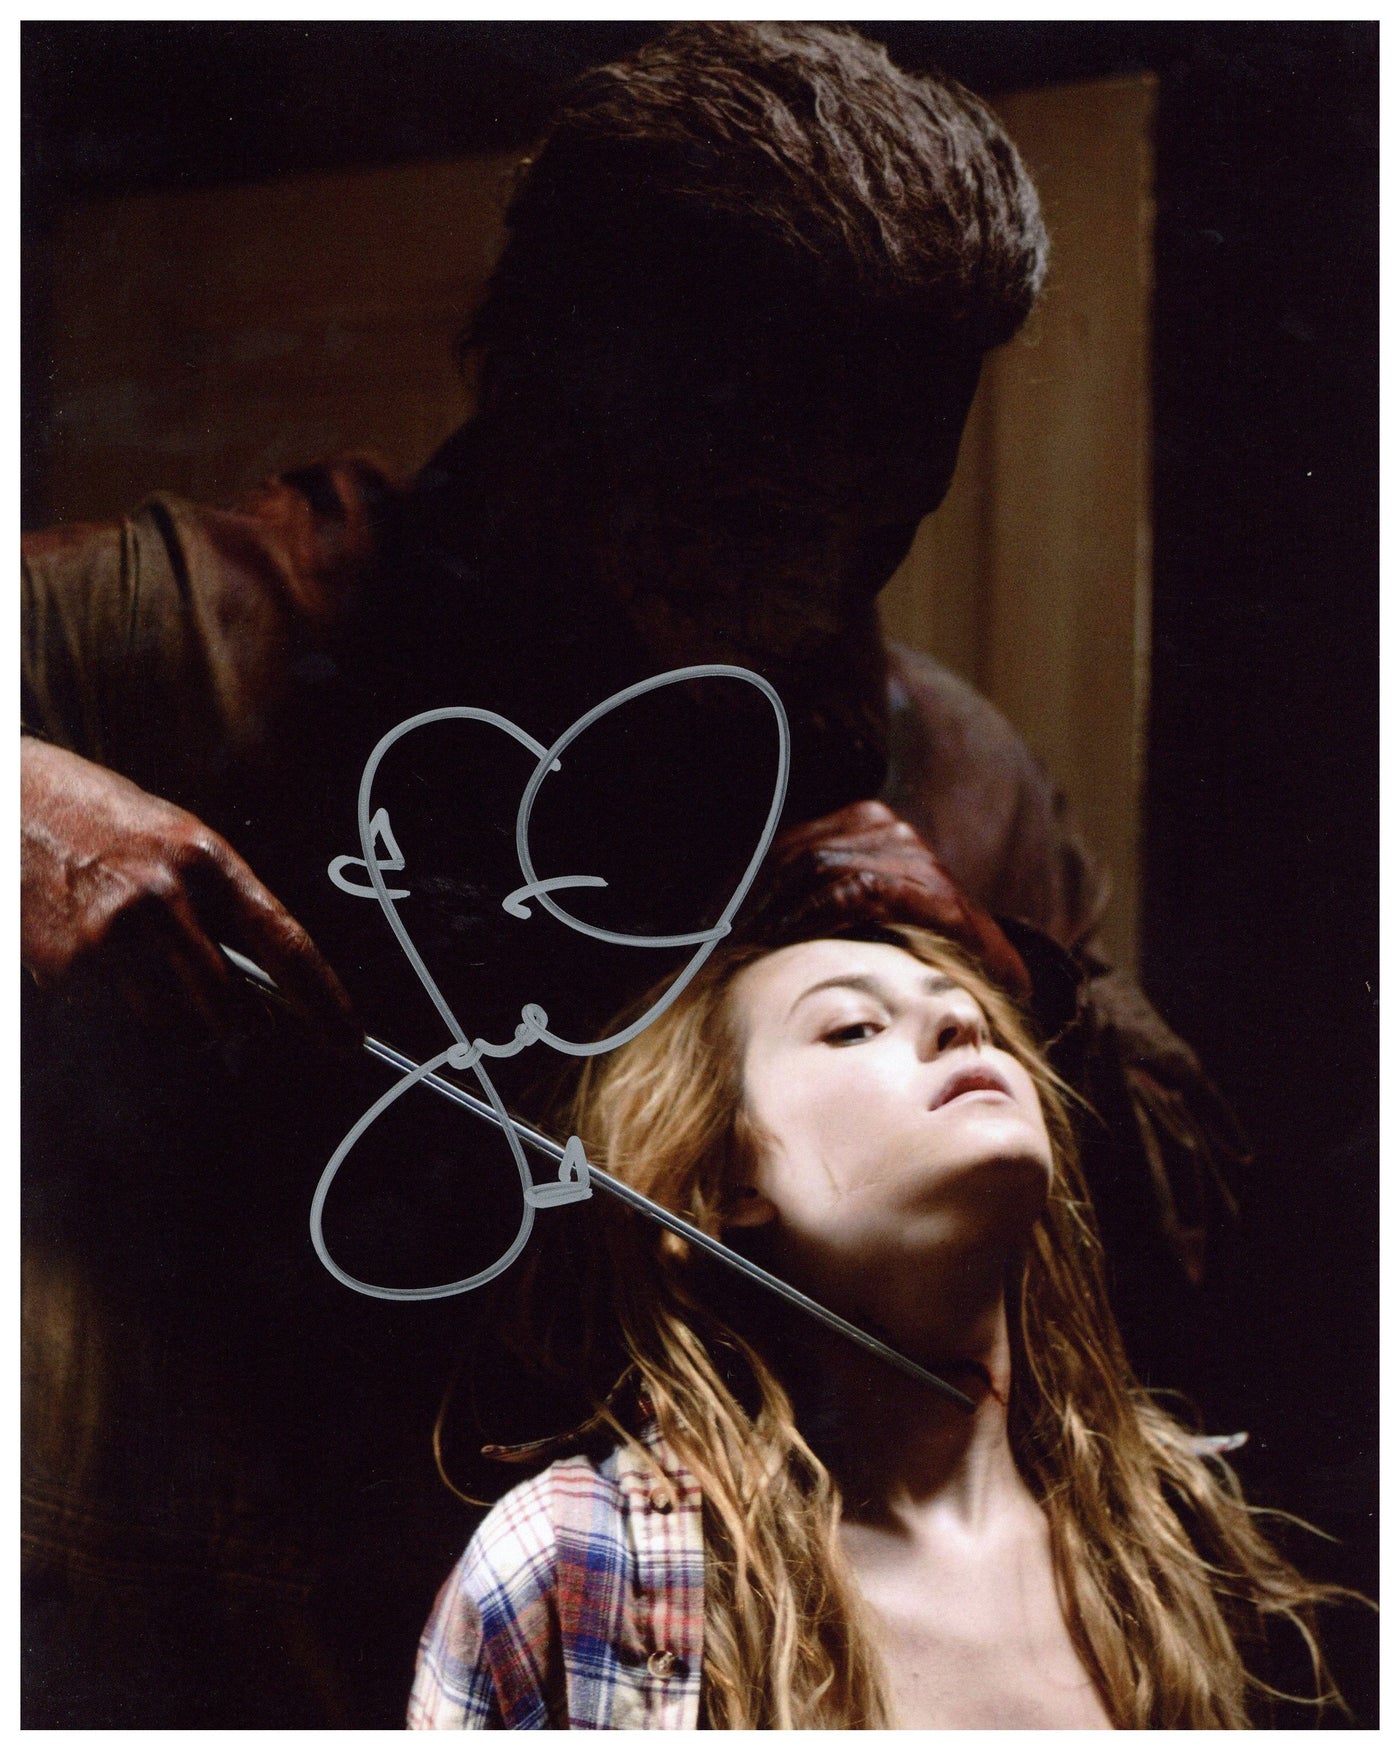 Scout Taylor-Compton Signed 8x10 Photo Halloween Rob Zombie Autographed JSA COA